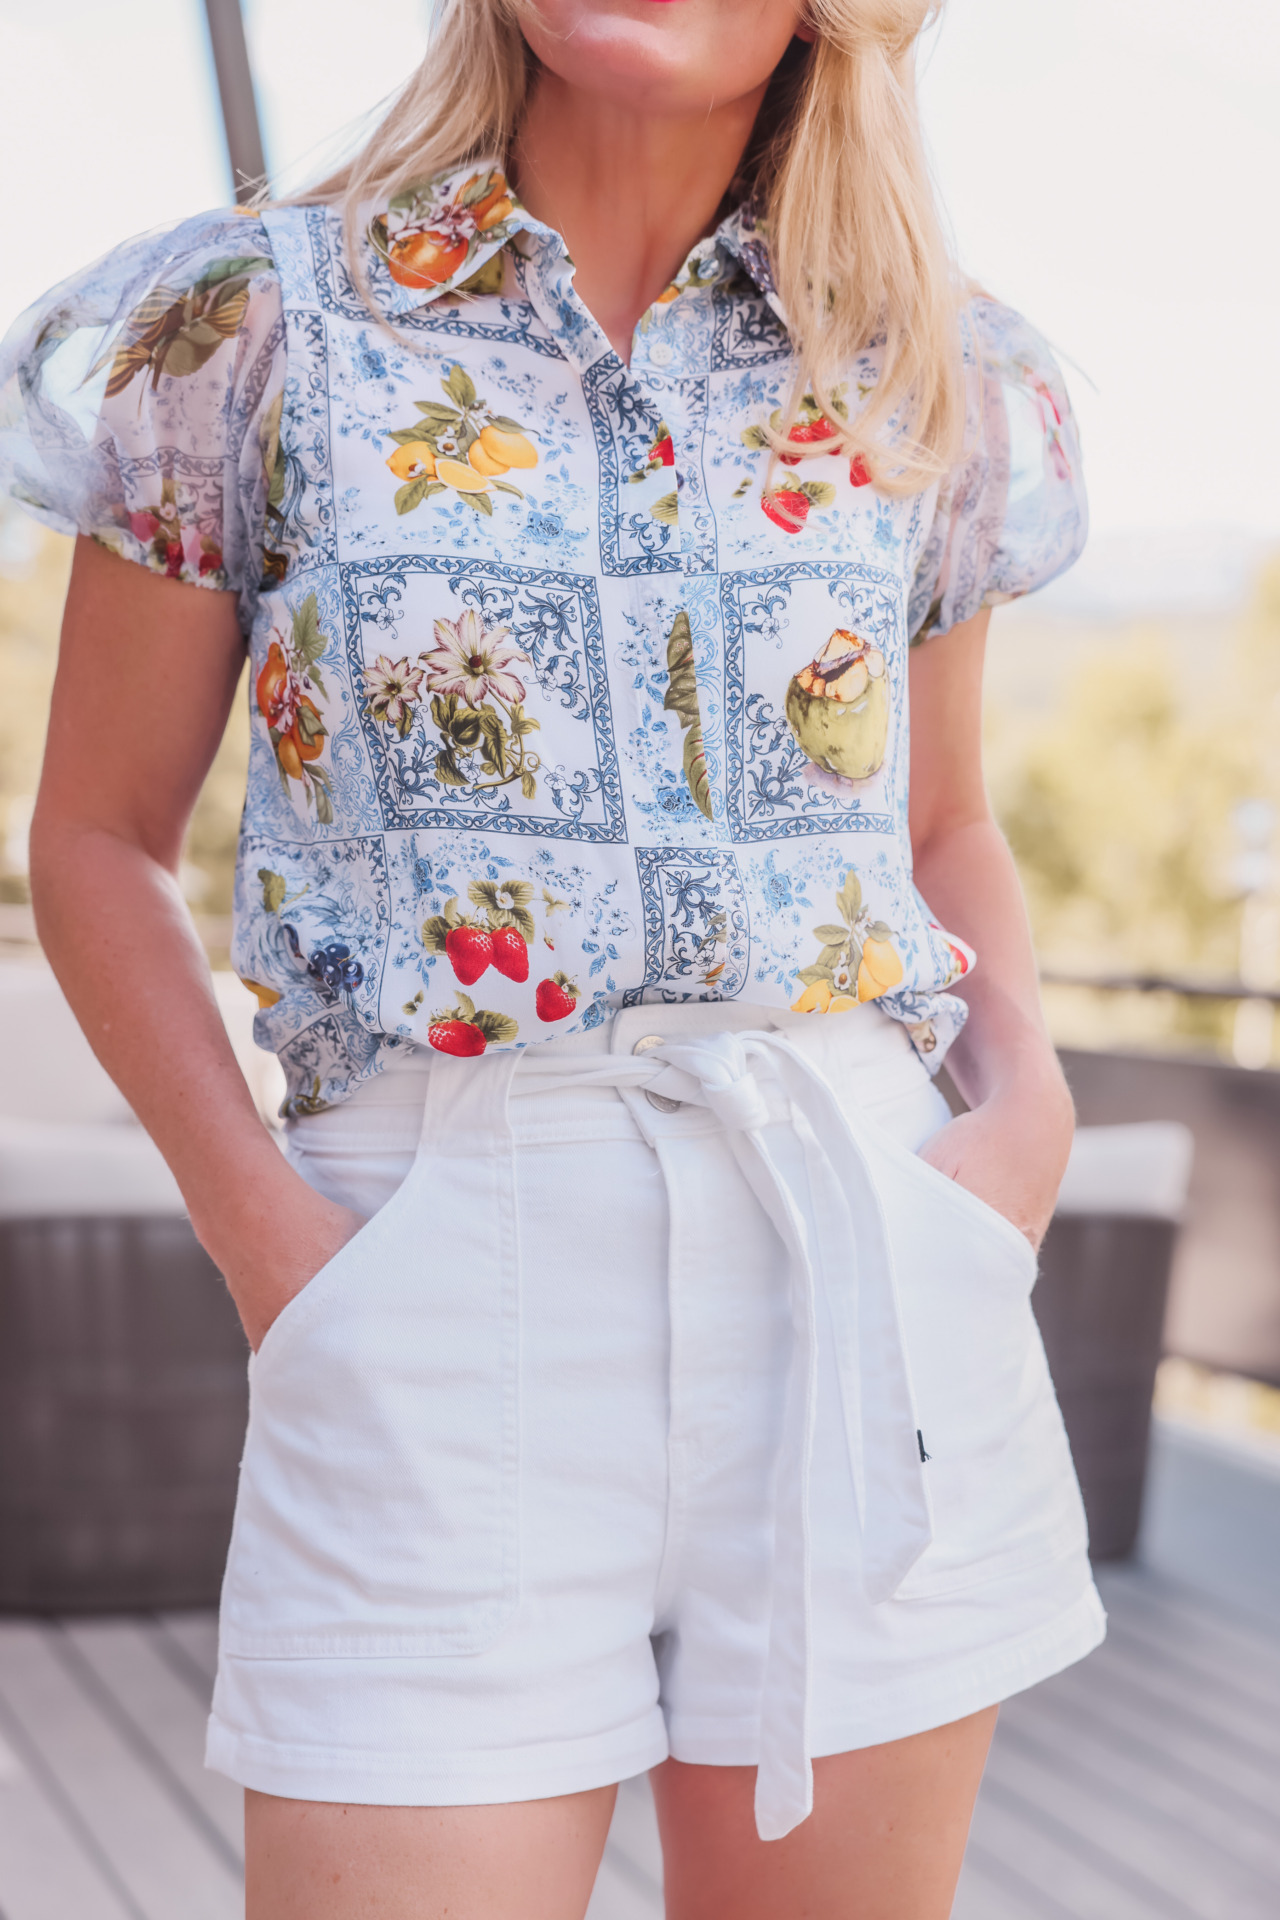 Printed Top & White Shorts for summer